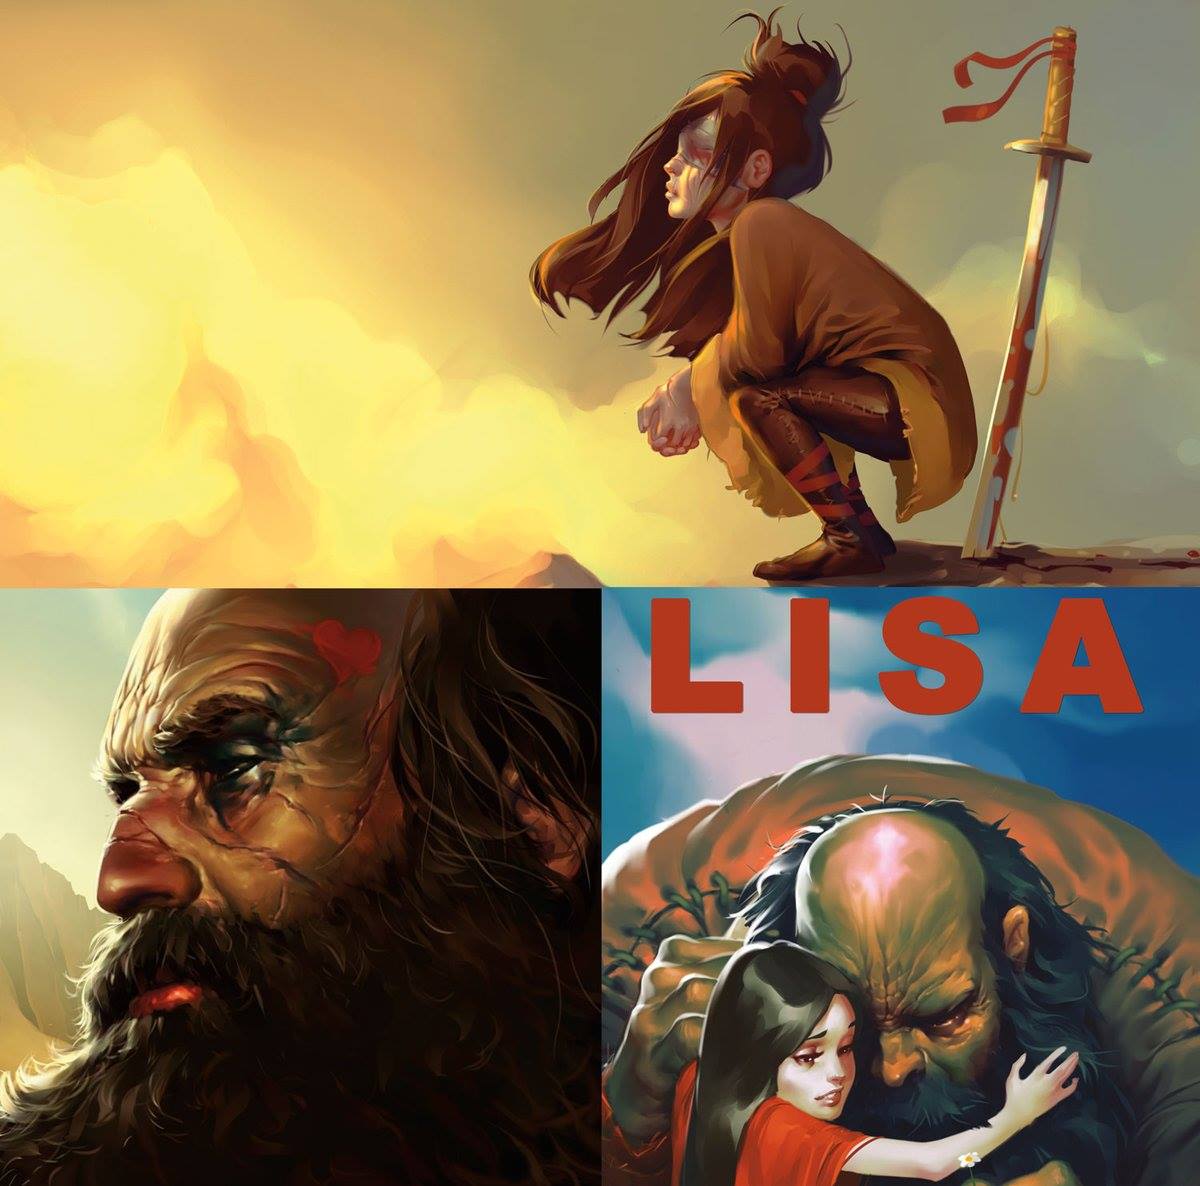 Lisa The Painful Rpg Soundtrack